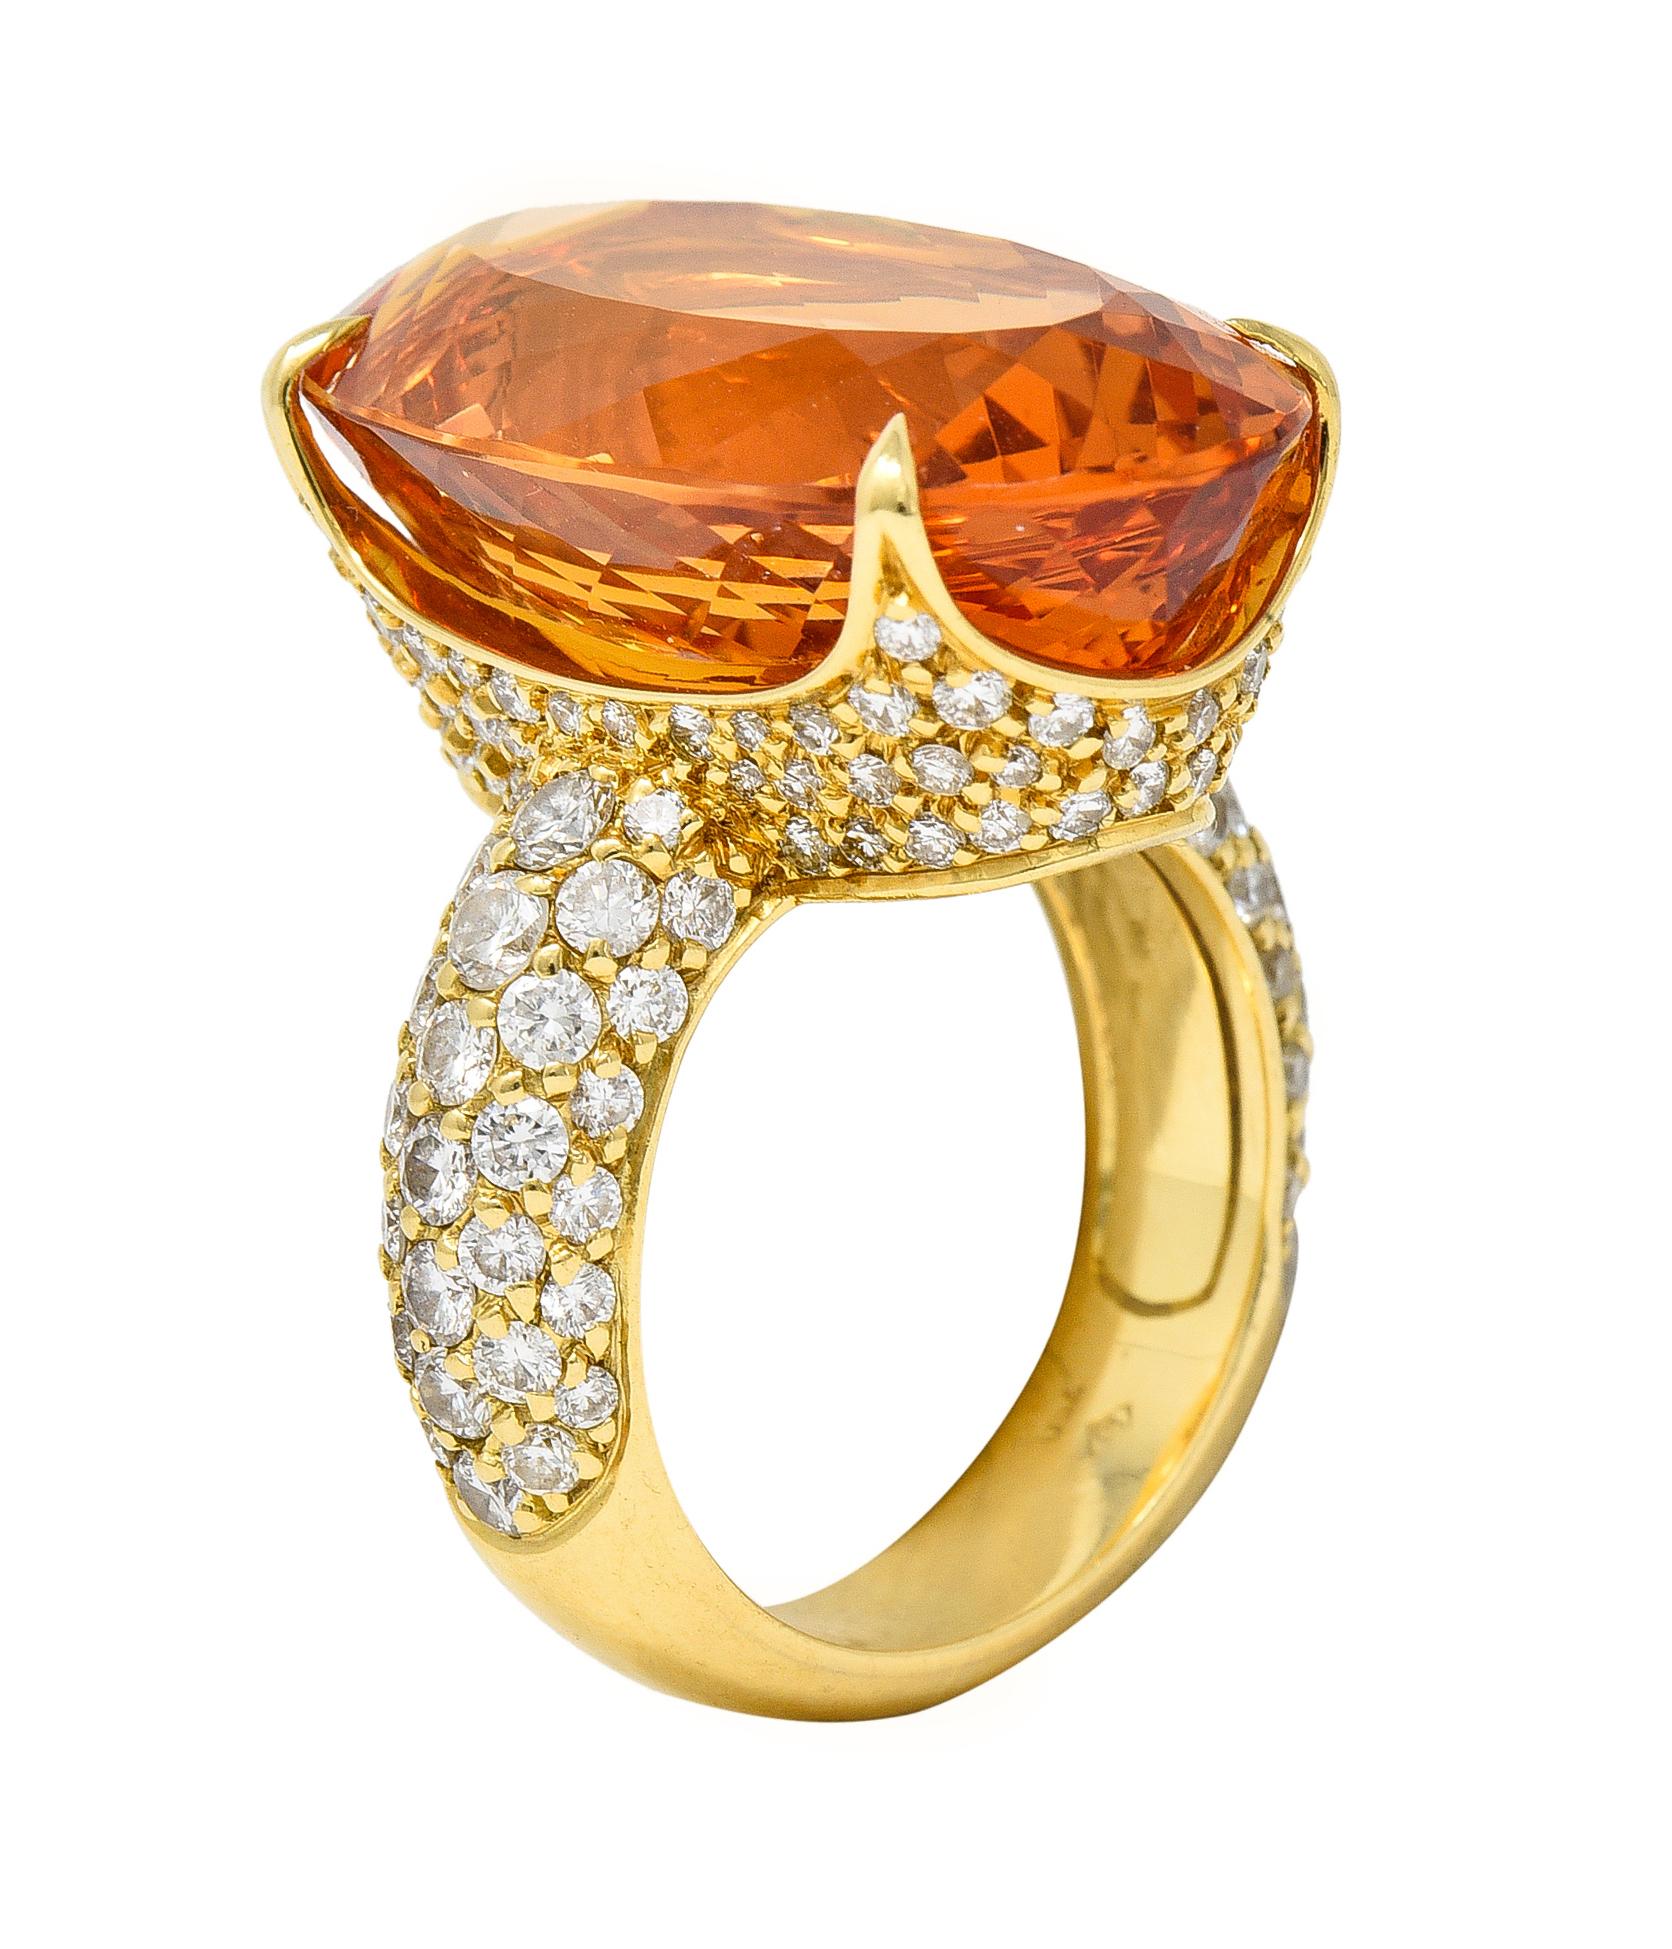 Centering a mixed-cut oval-shaped imperial topaz weighing approximately 24.21 carats
Transparent light to medium pinkish-orange in color and prong set
With round brilliant cut diamonds pavé set in gallery and shoulders
Weighing approximately 1.82